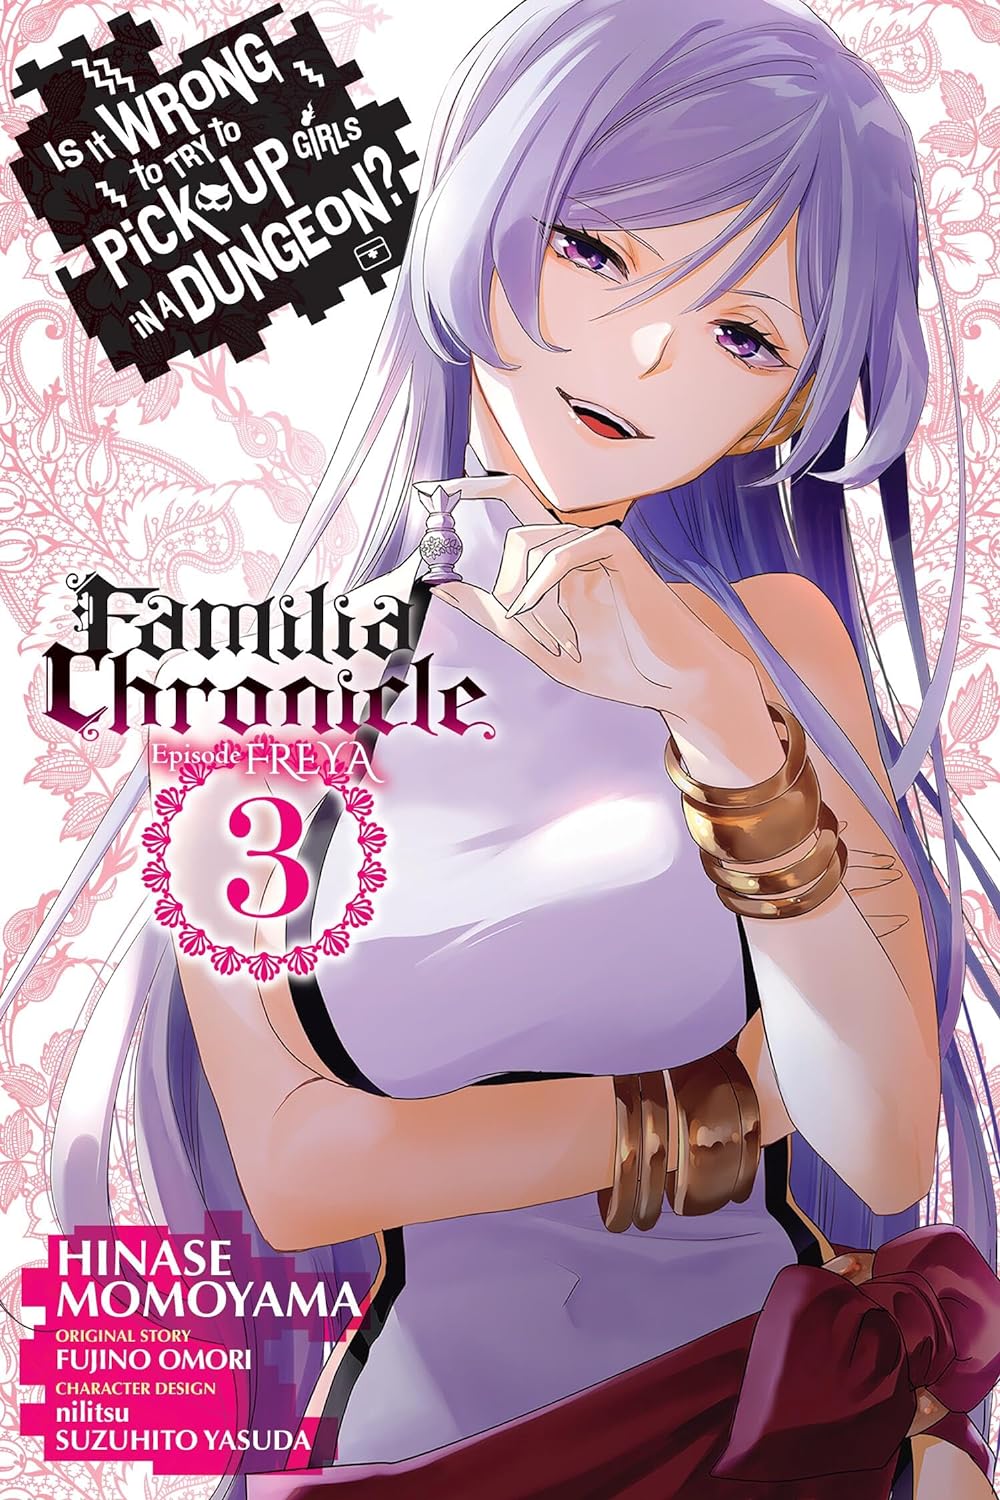 Is It Wrong to Try to Pick Up Girls in a Dungeon? Familia Chronicle Episode Freya (Manga) Vol. 03